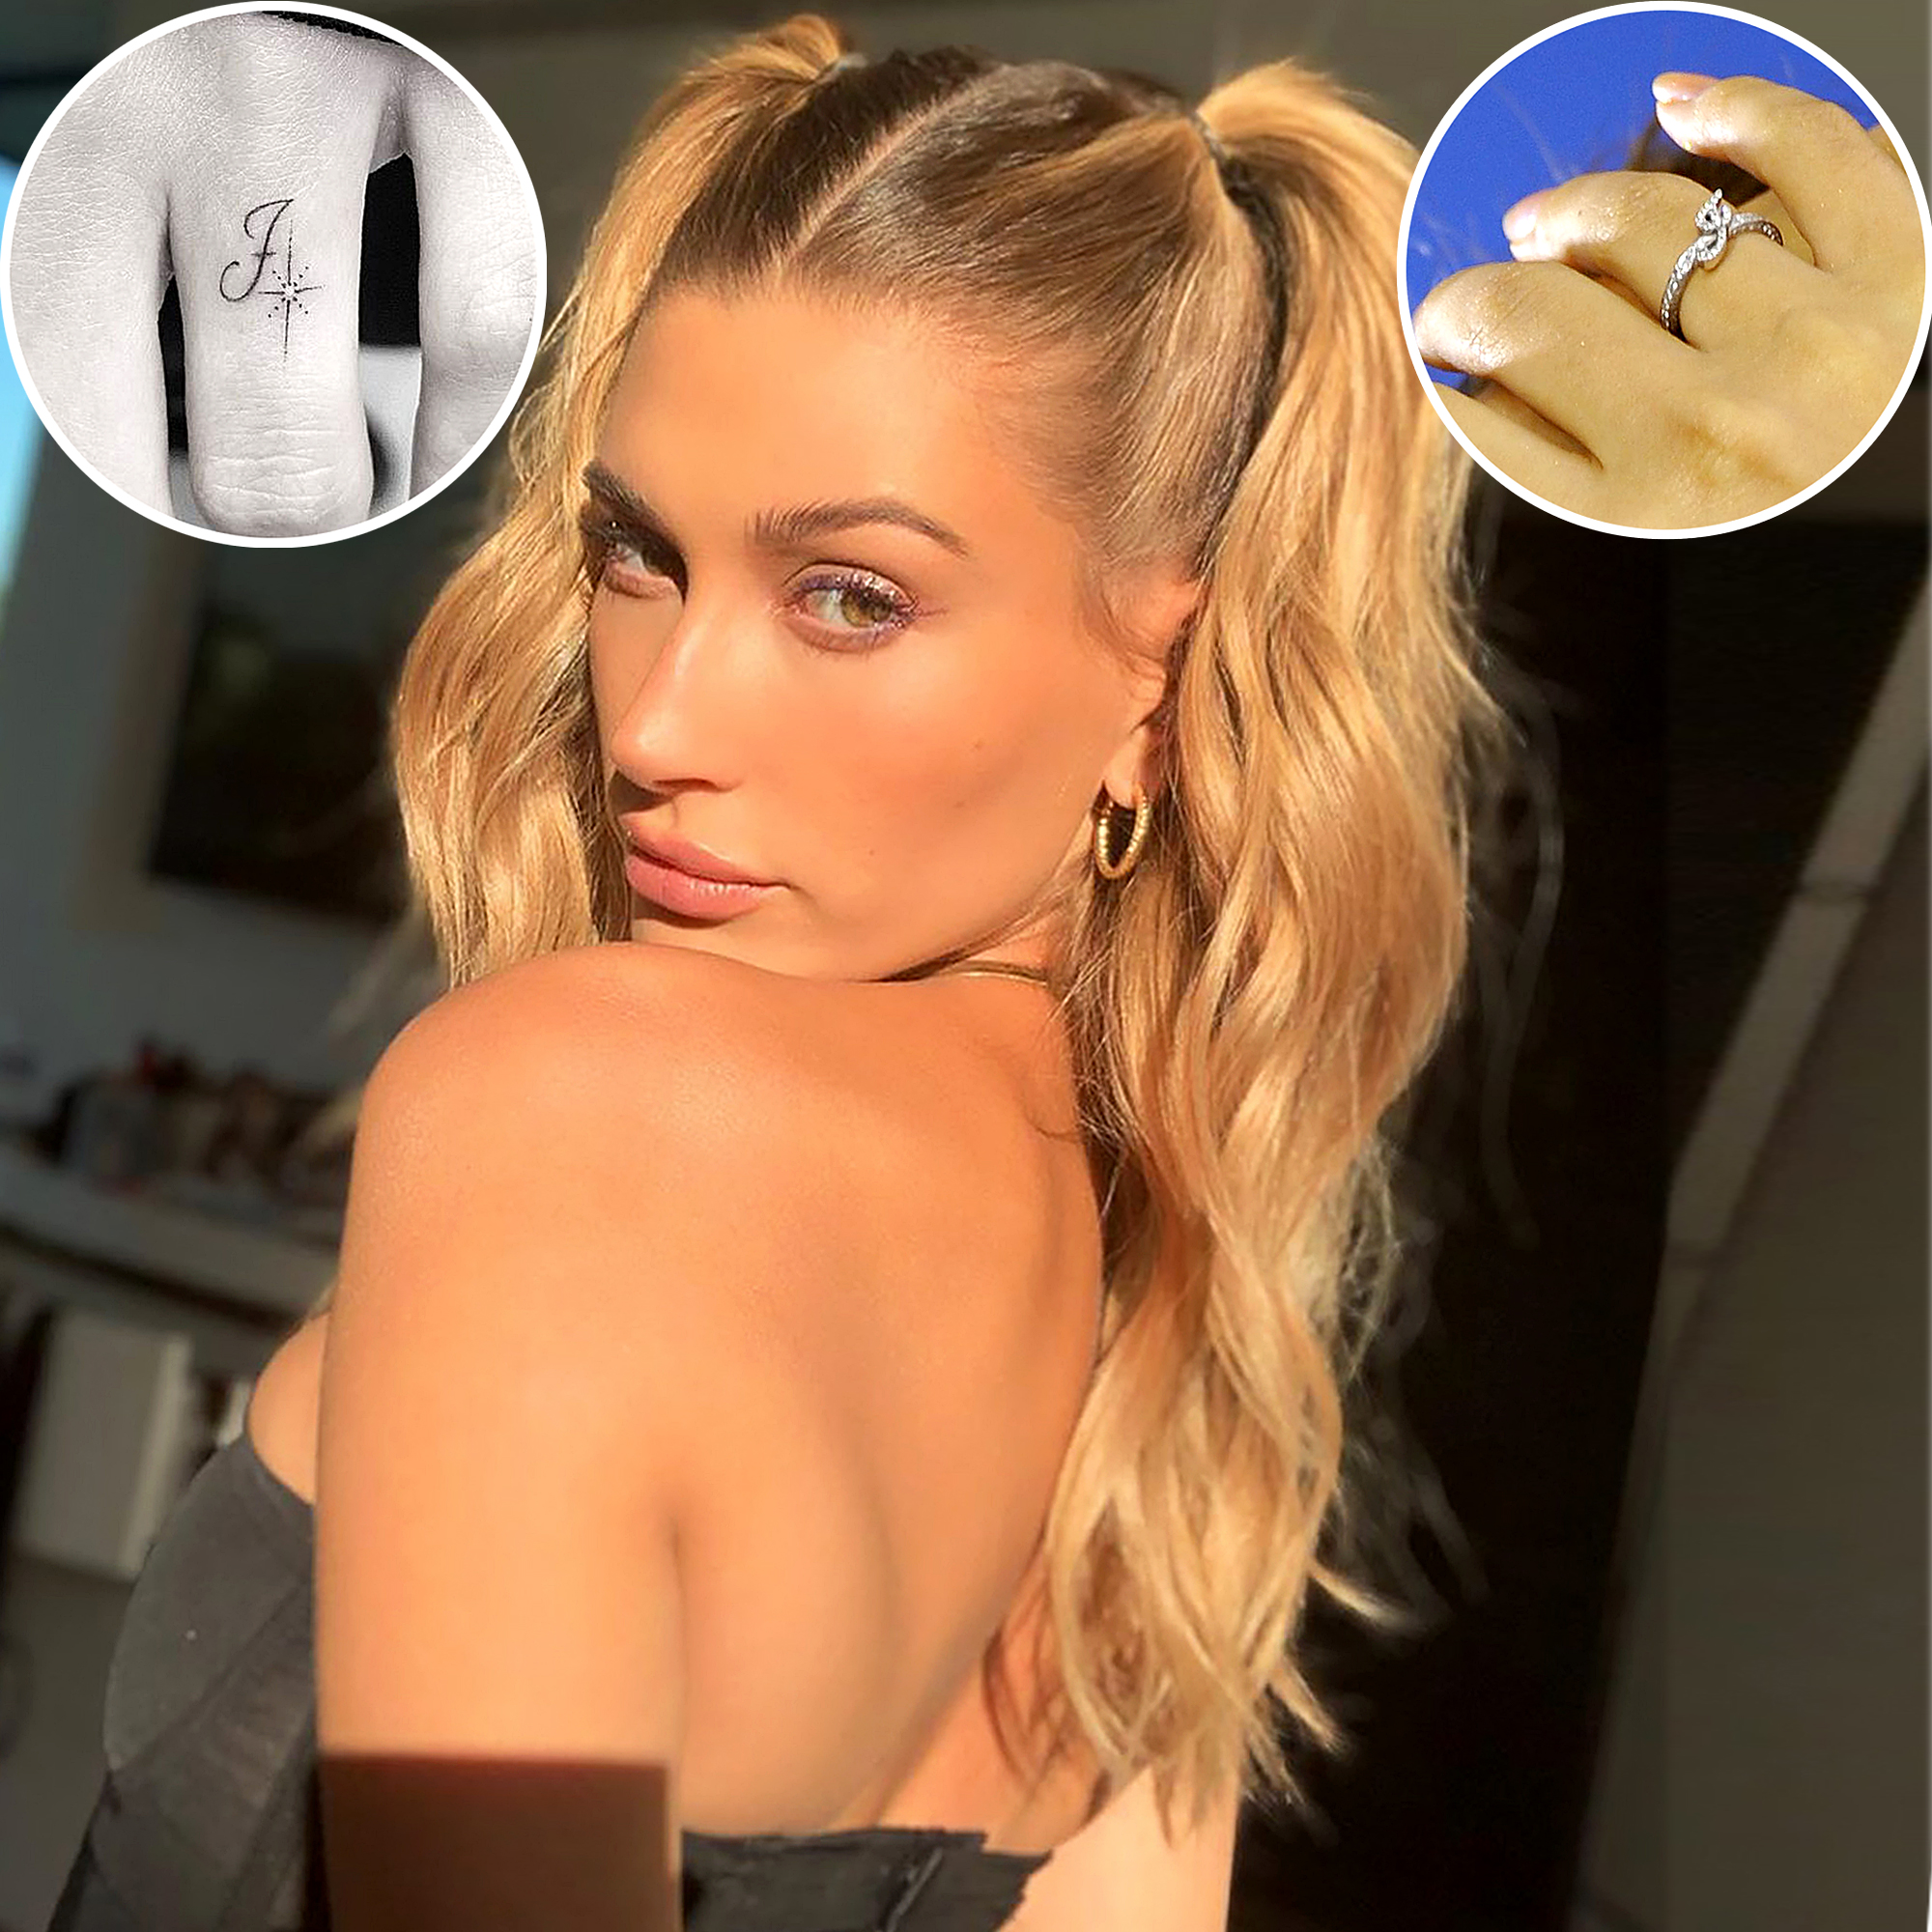 Hailey Baldwin Expresses Love for Husband Justin Bieber with New Tattoo   News18